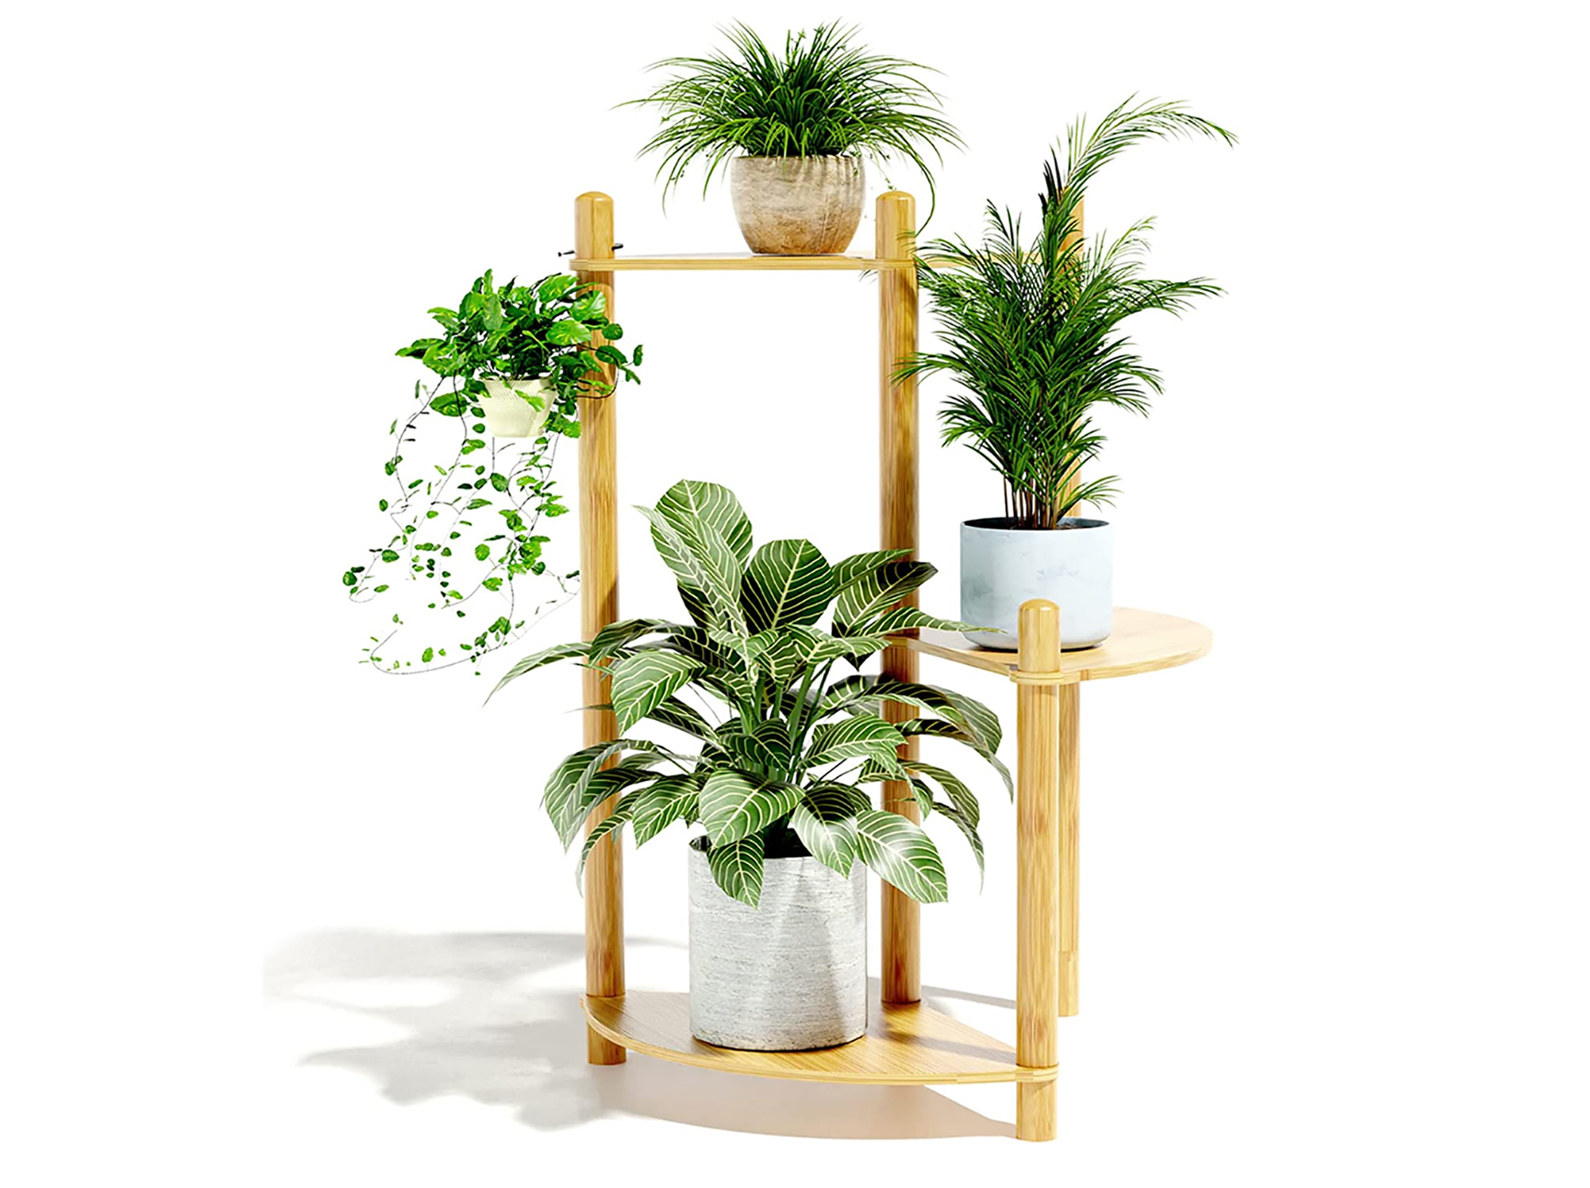 An image of an Enisudo plant stand